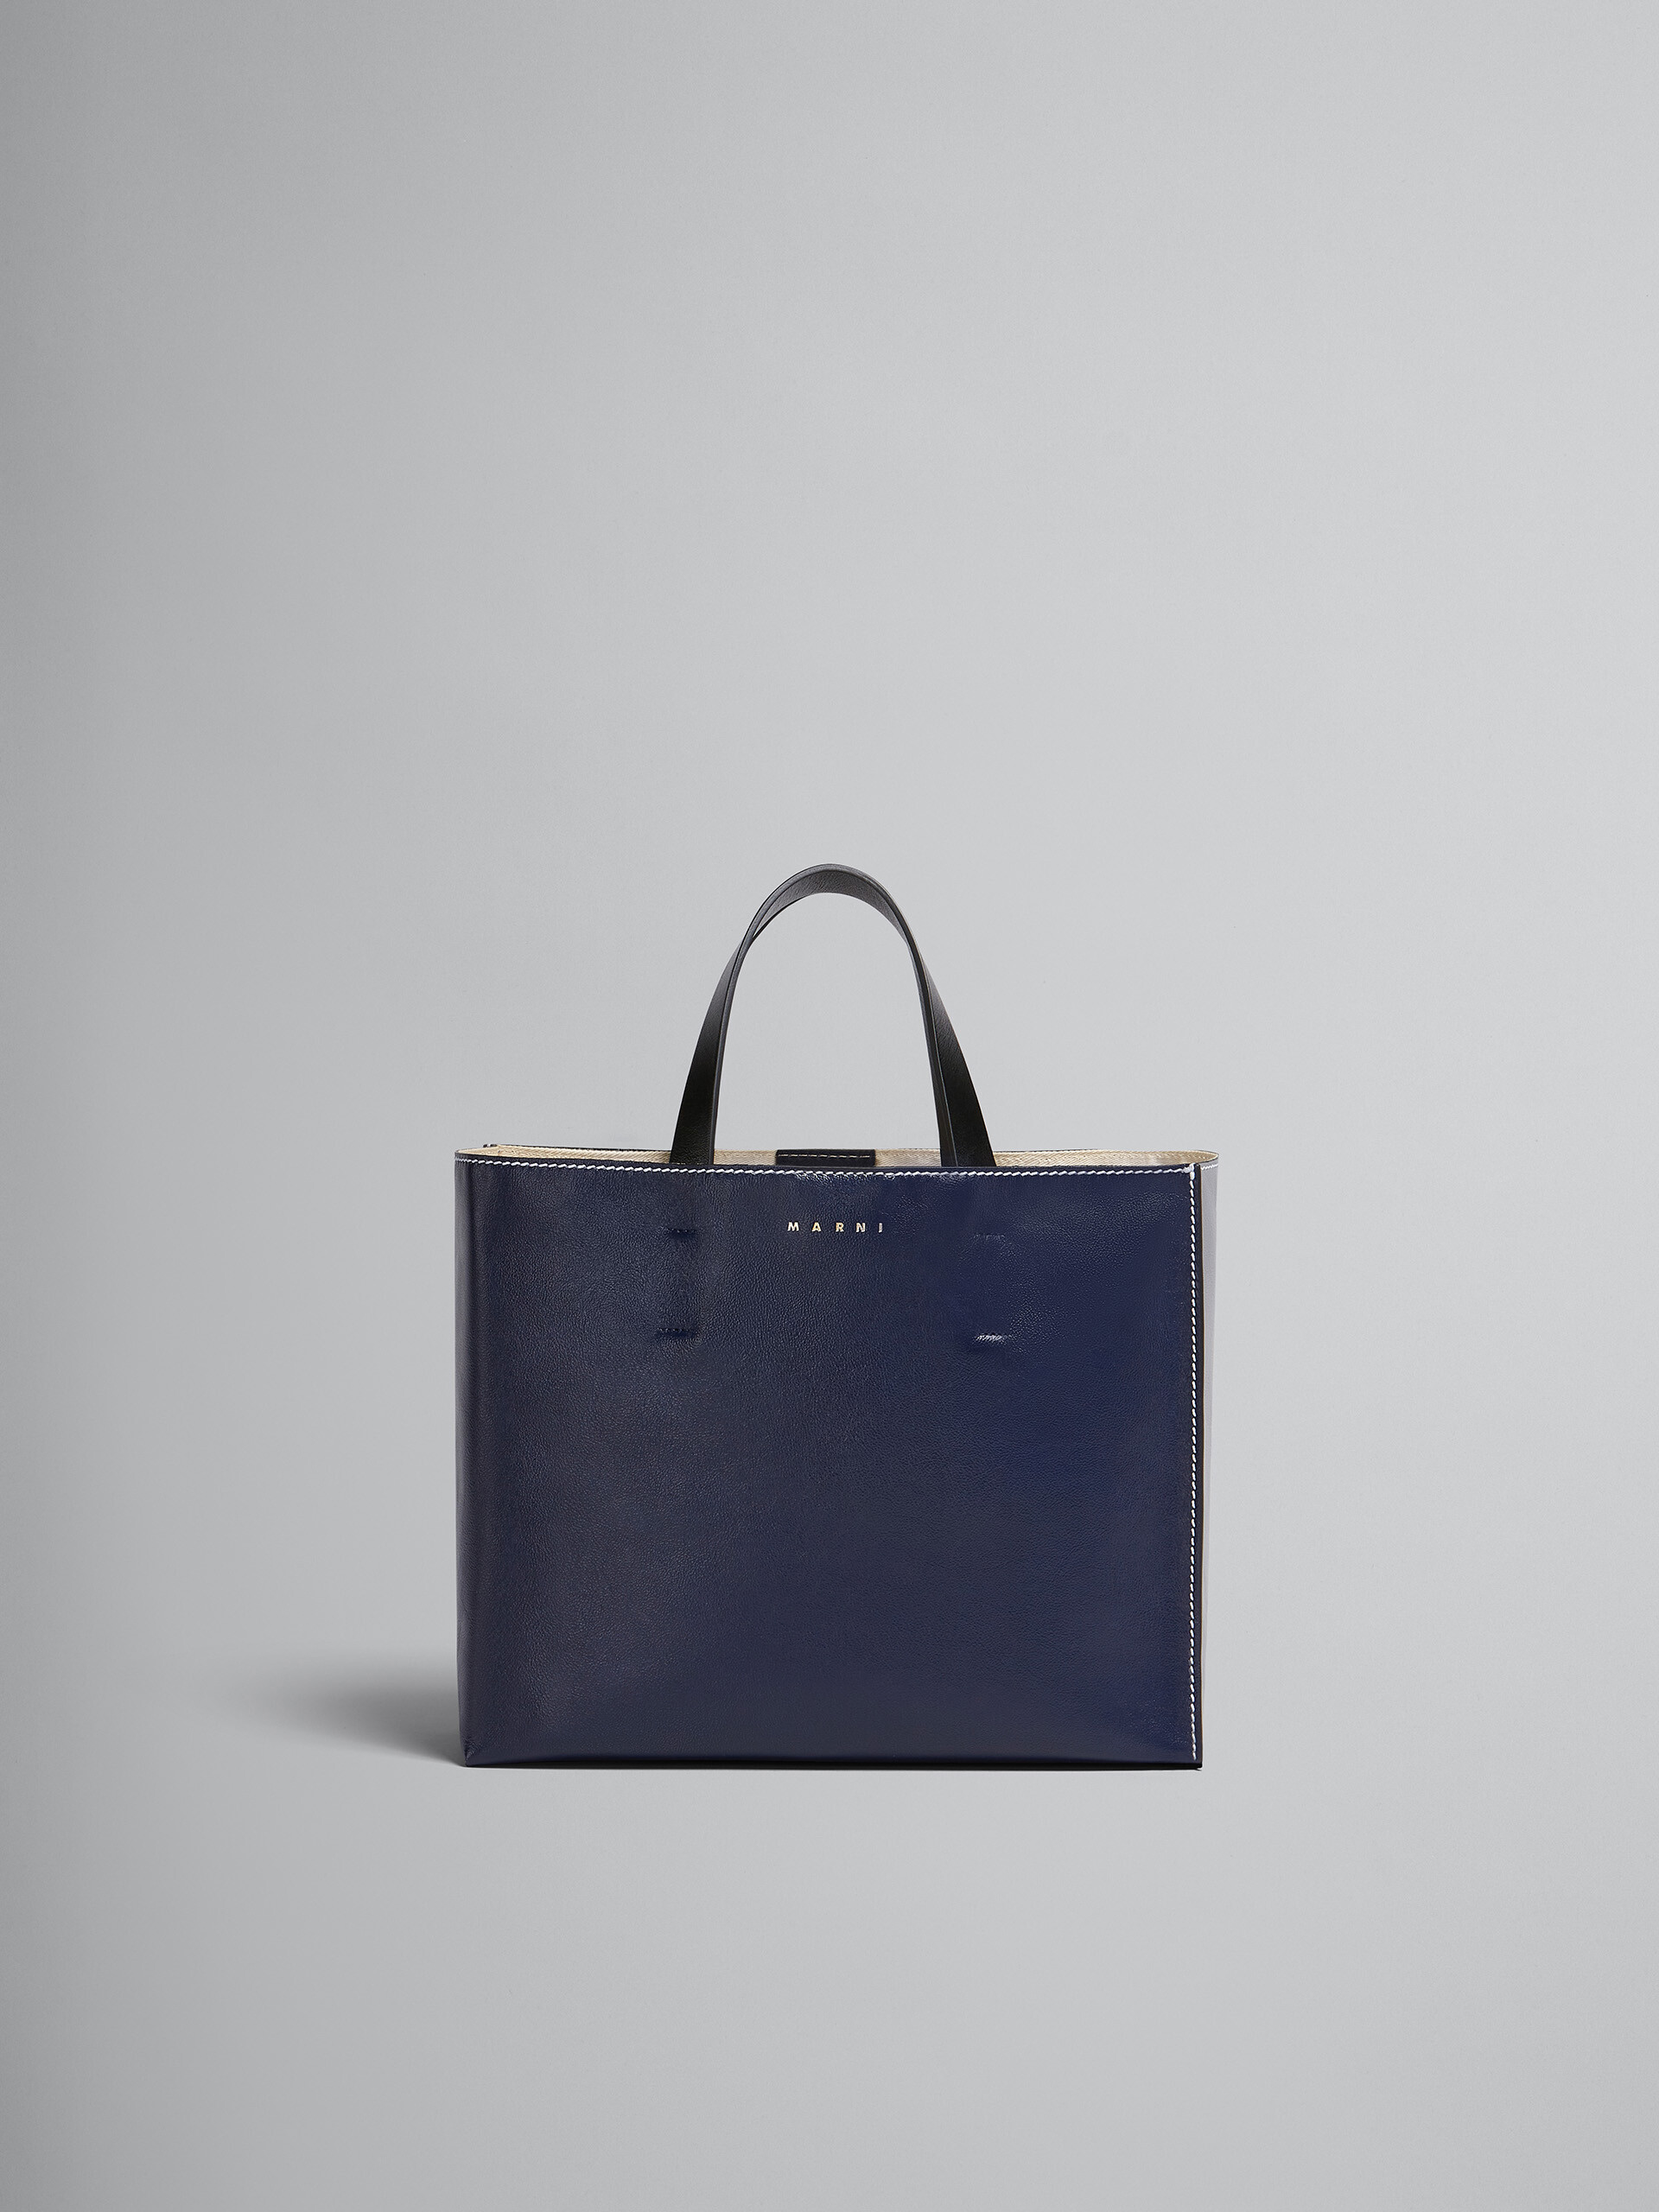 MUSEO SOFT bag in blue and grey leather - Shopping Bags - Image 1